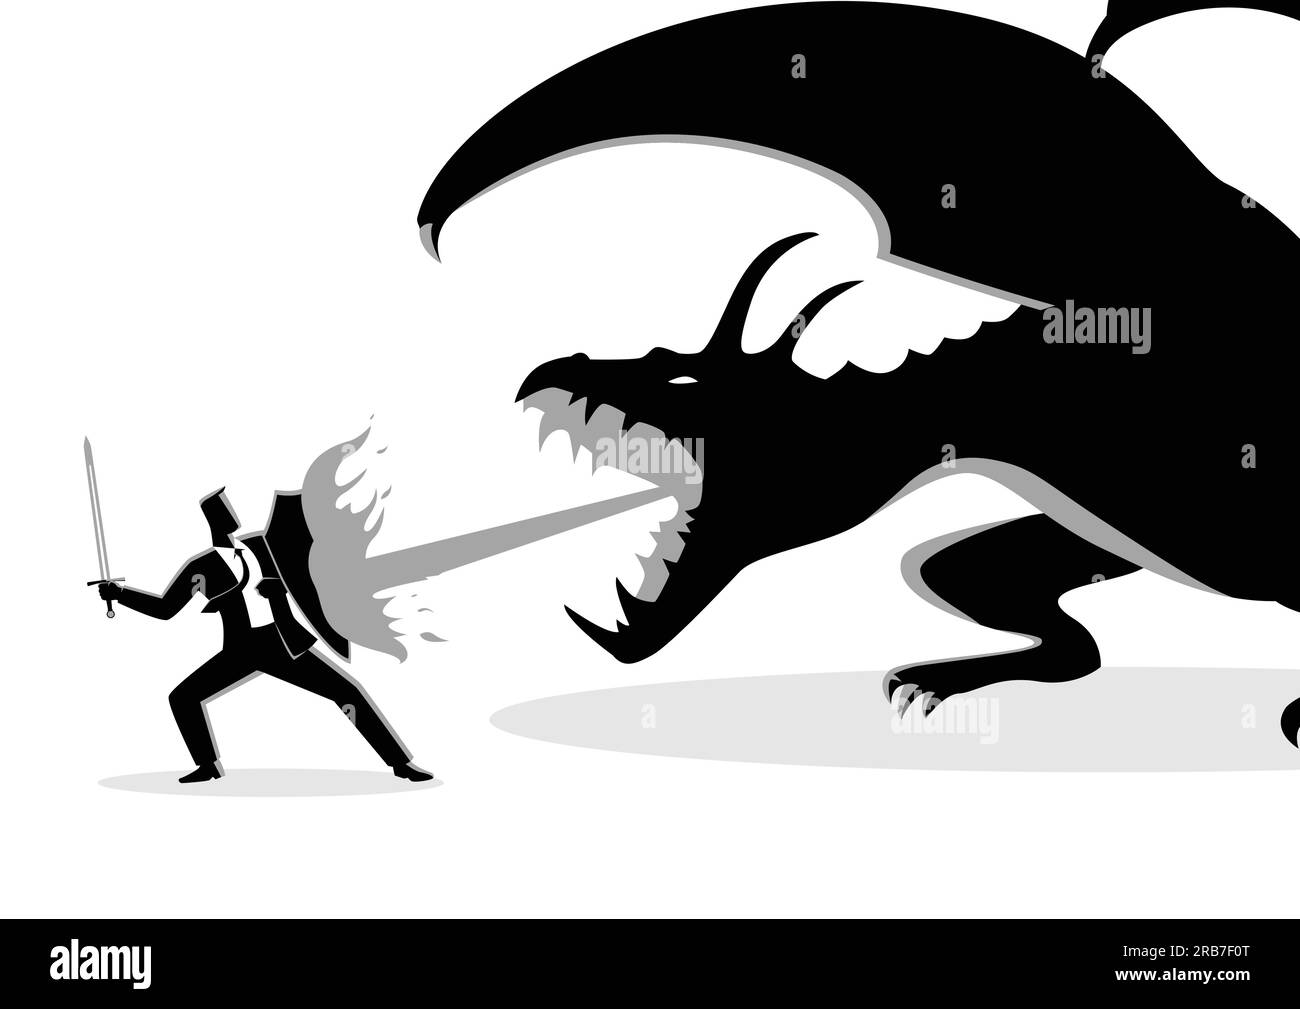 Business concept vector illustration of a businessman fighting a dragon. Risk, courage, leadership in business concept Stock Vector